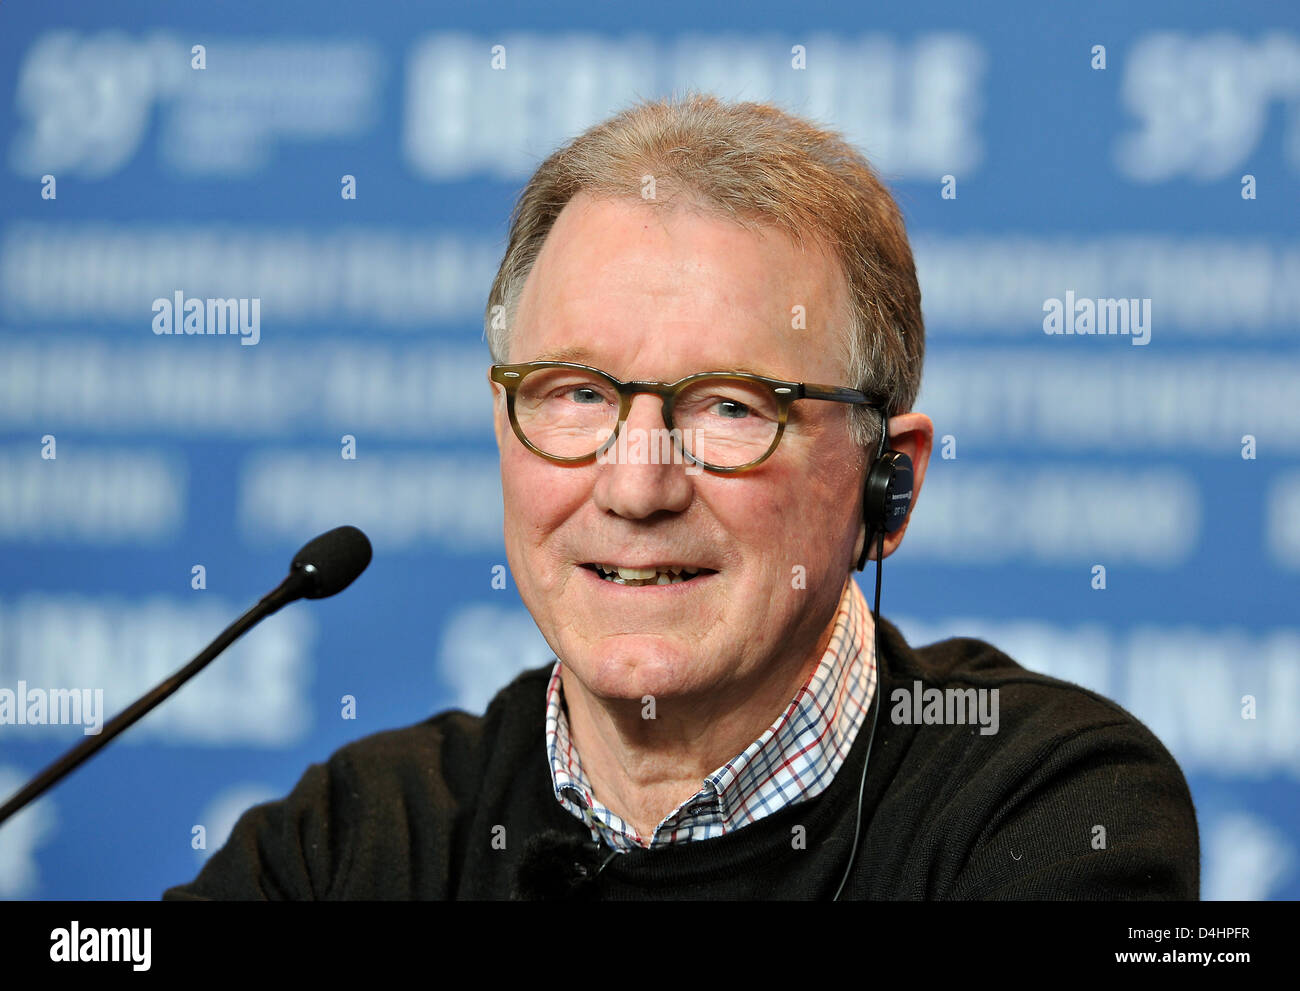 Danish actor Finn Nielsen smiles during a press conference of her film ?Little Soldier? at the 59th Berlin International Film Festival in Berlin, Germany, 06 February 2009. A total of 18 films compete for the Silver and Golden Bears of the 59th Berlinale. Photo: GERO BRELOER Stock Photo